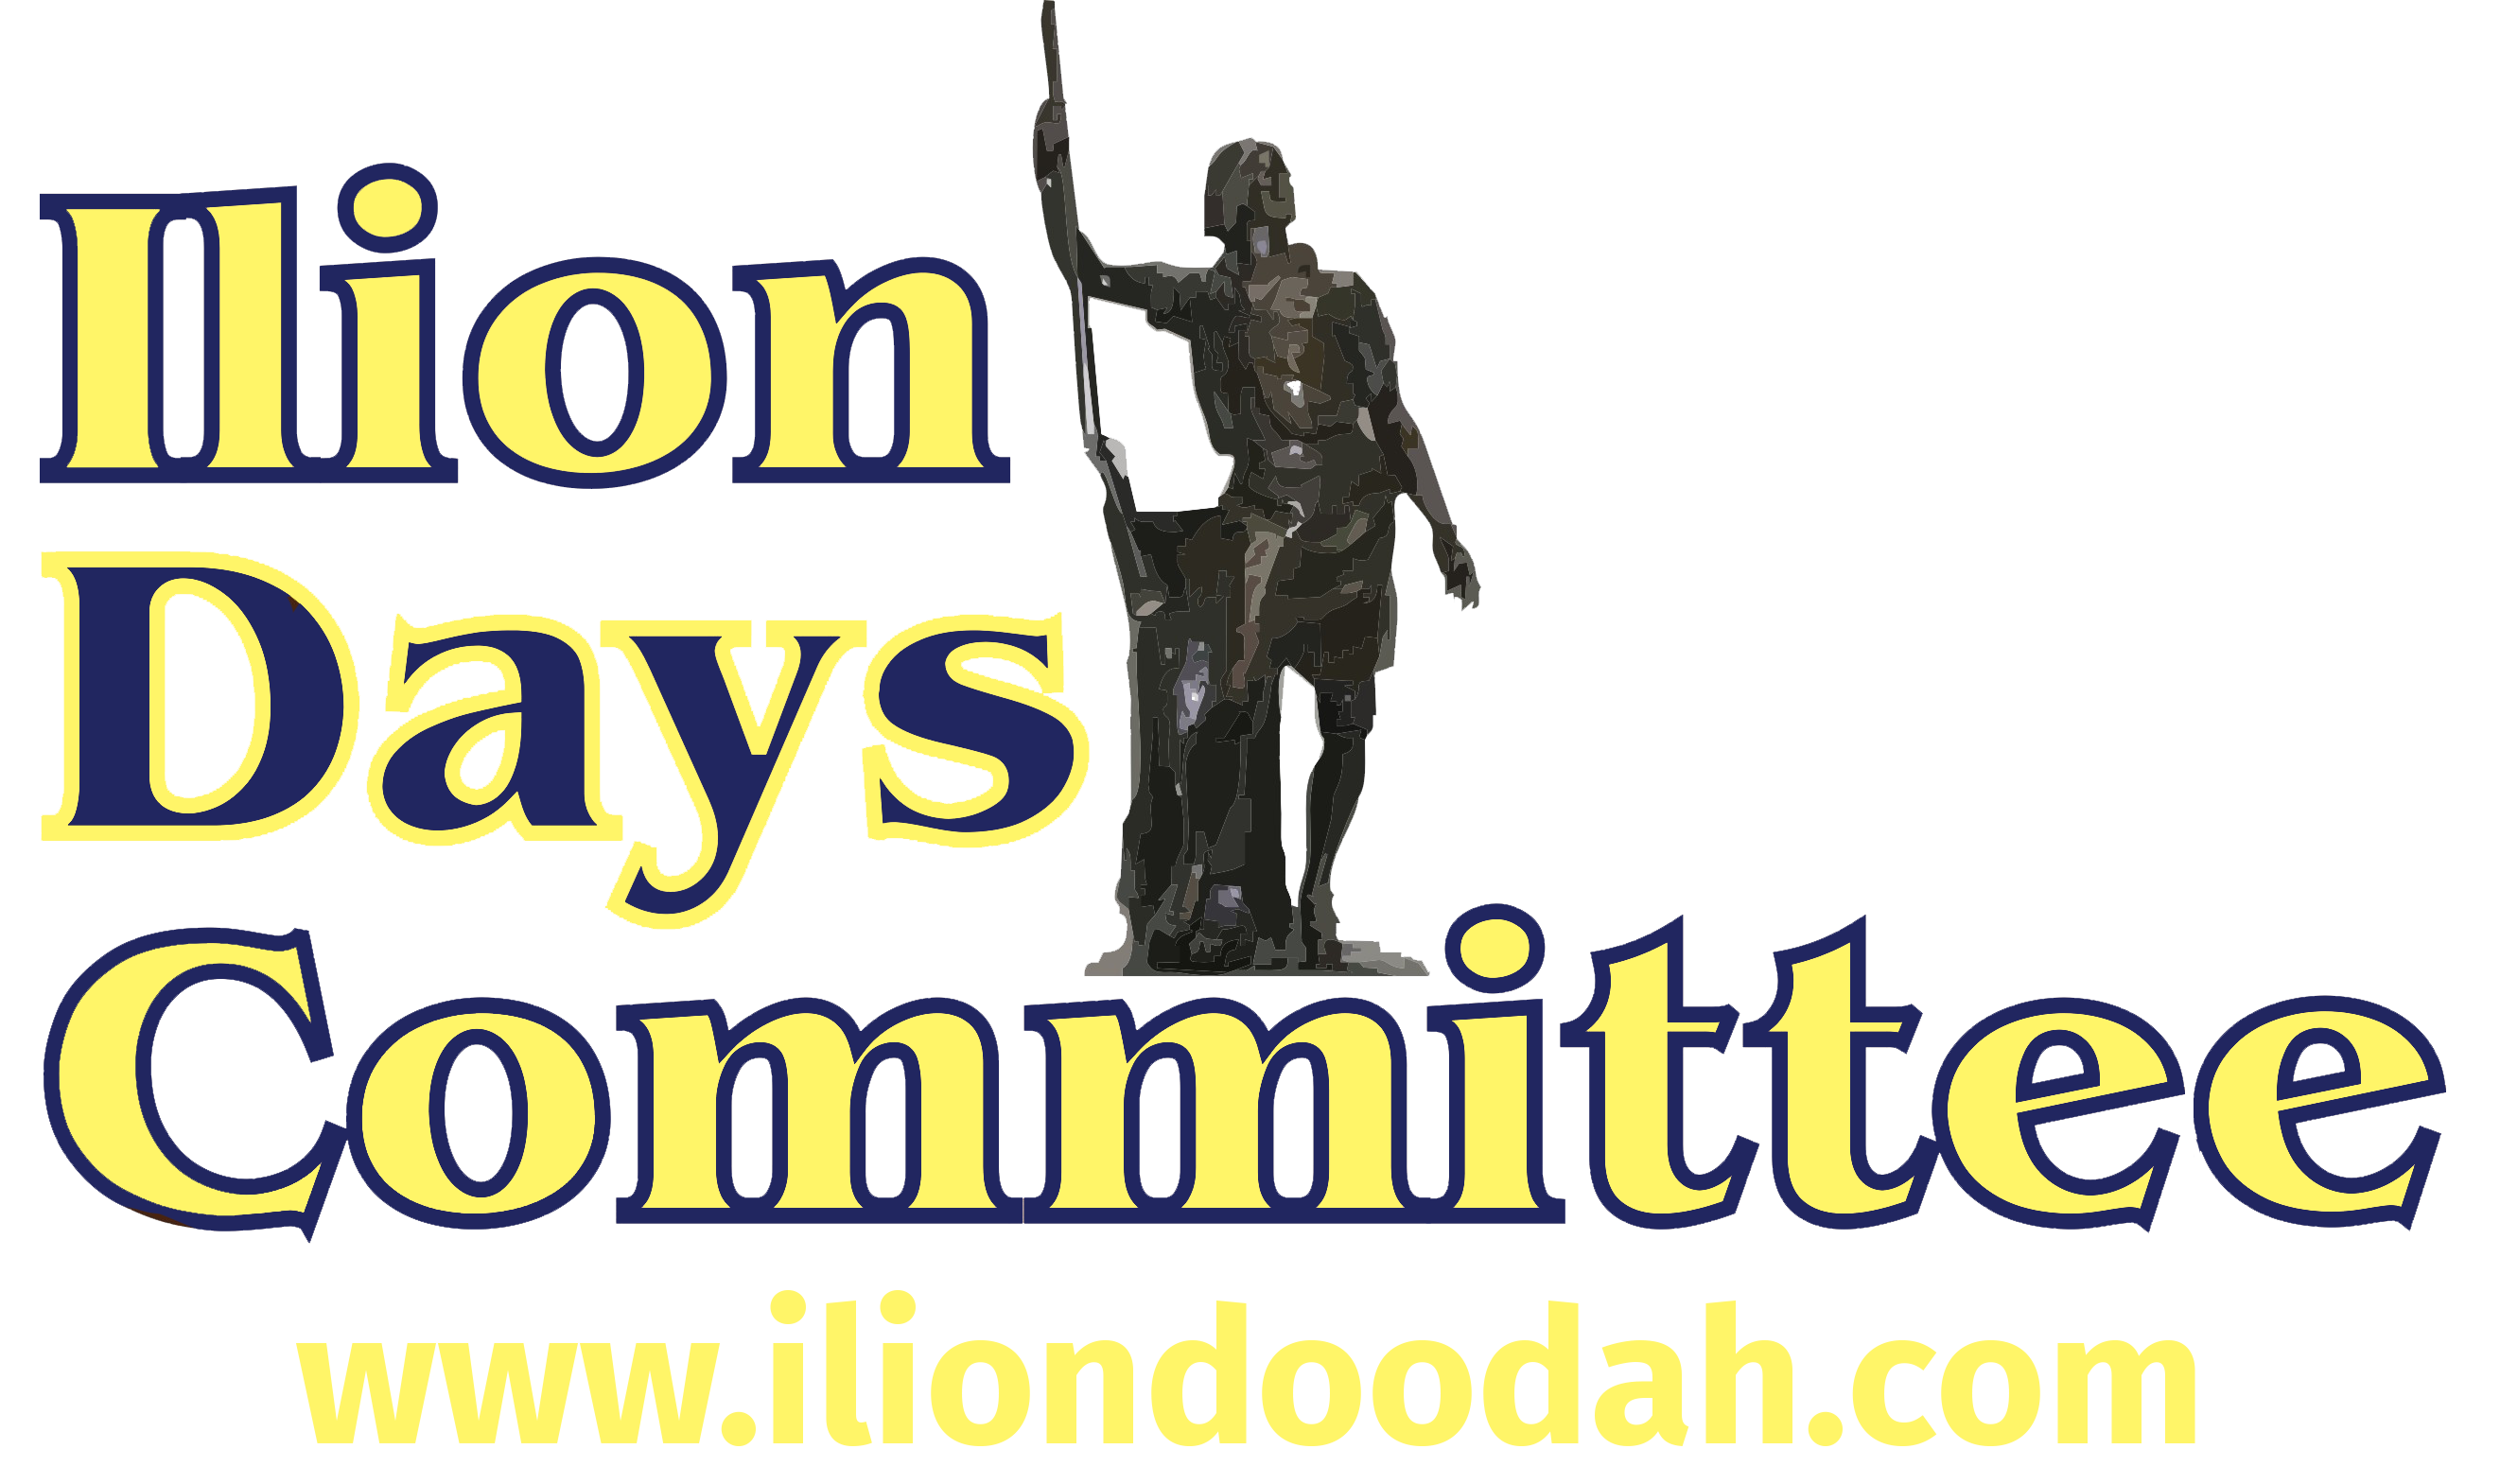 Ilion Days Committee